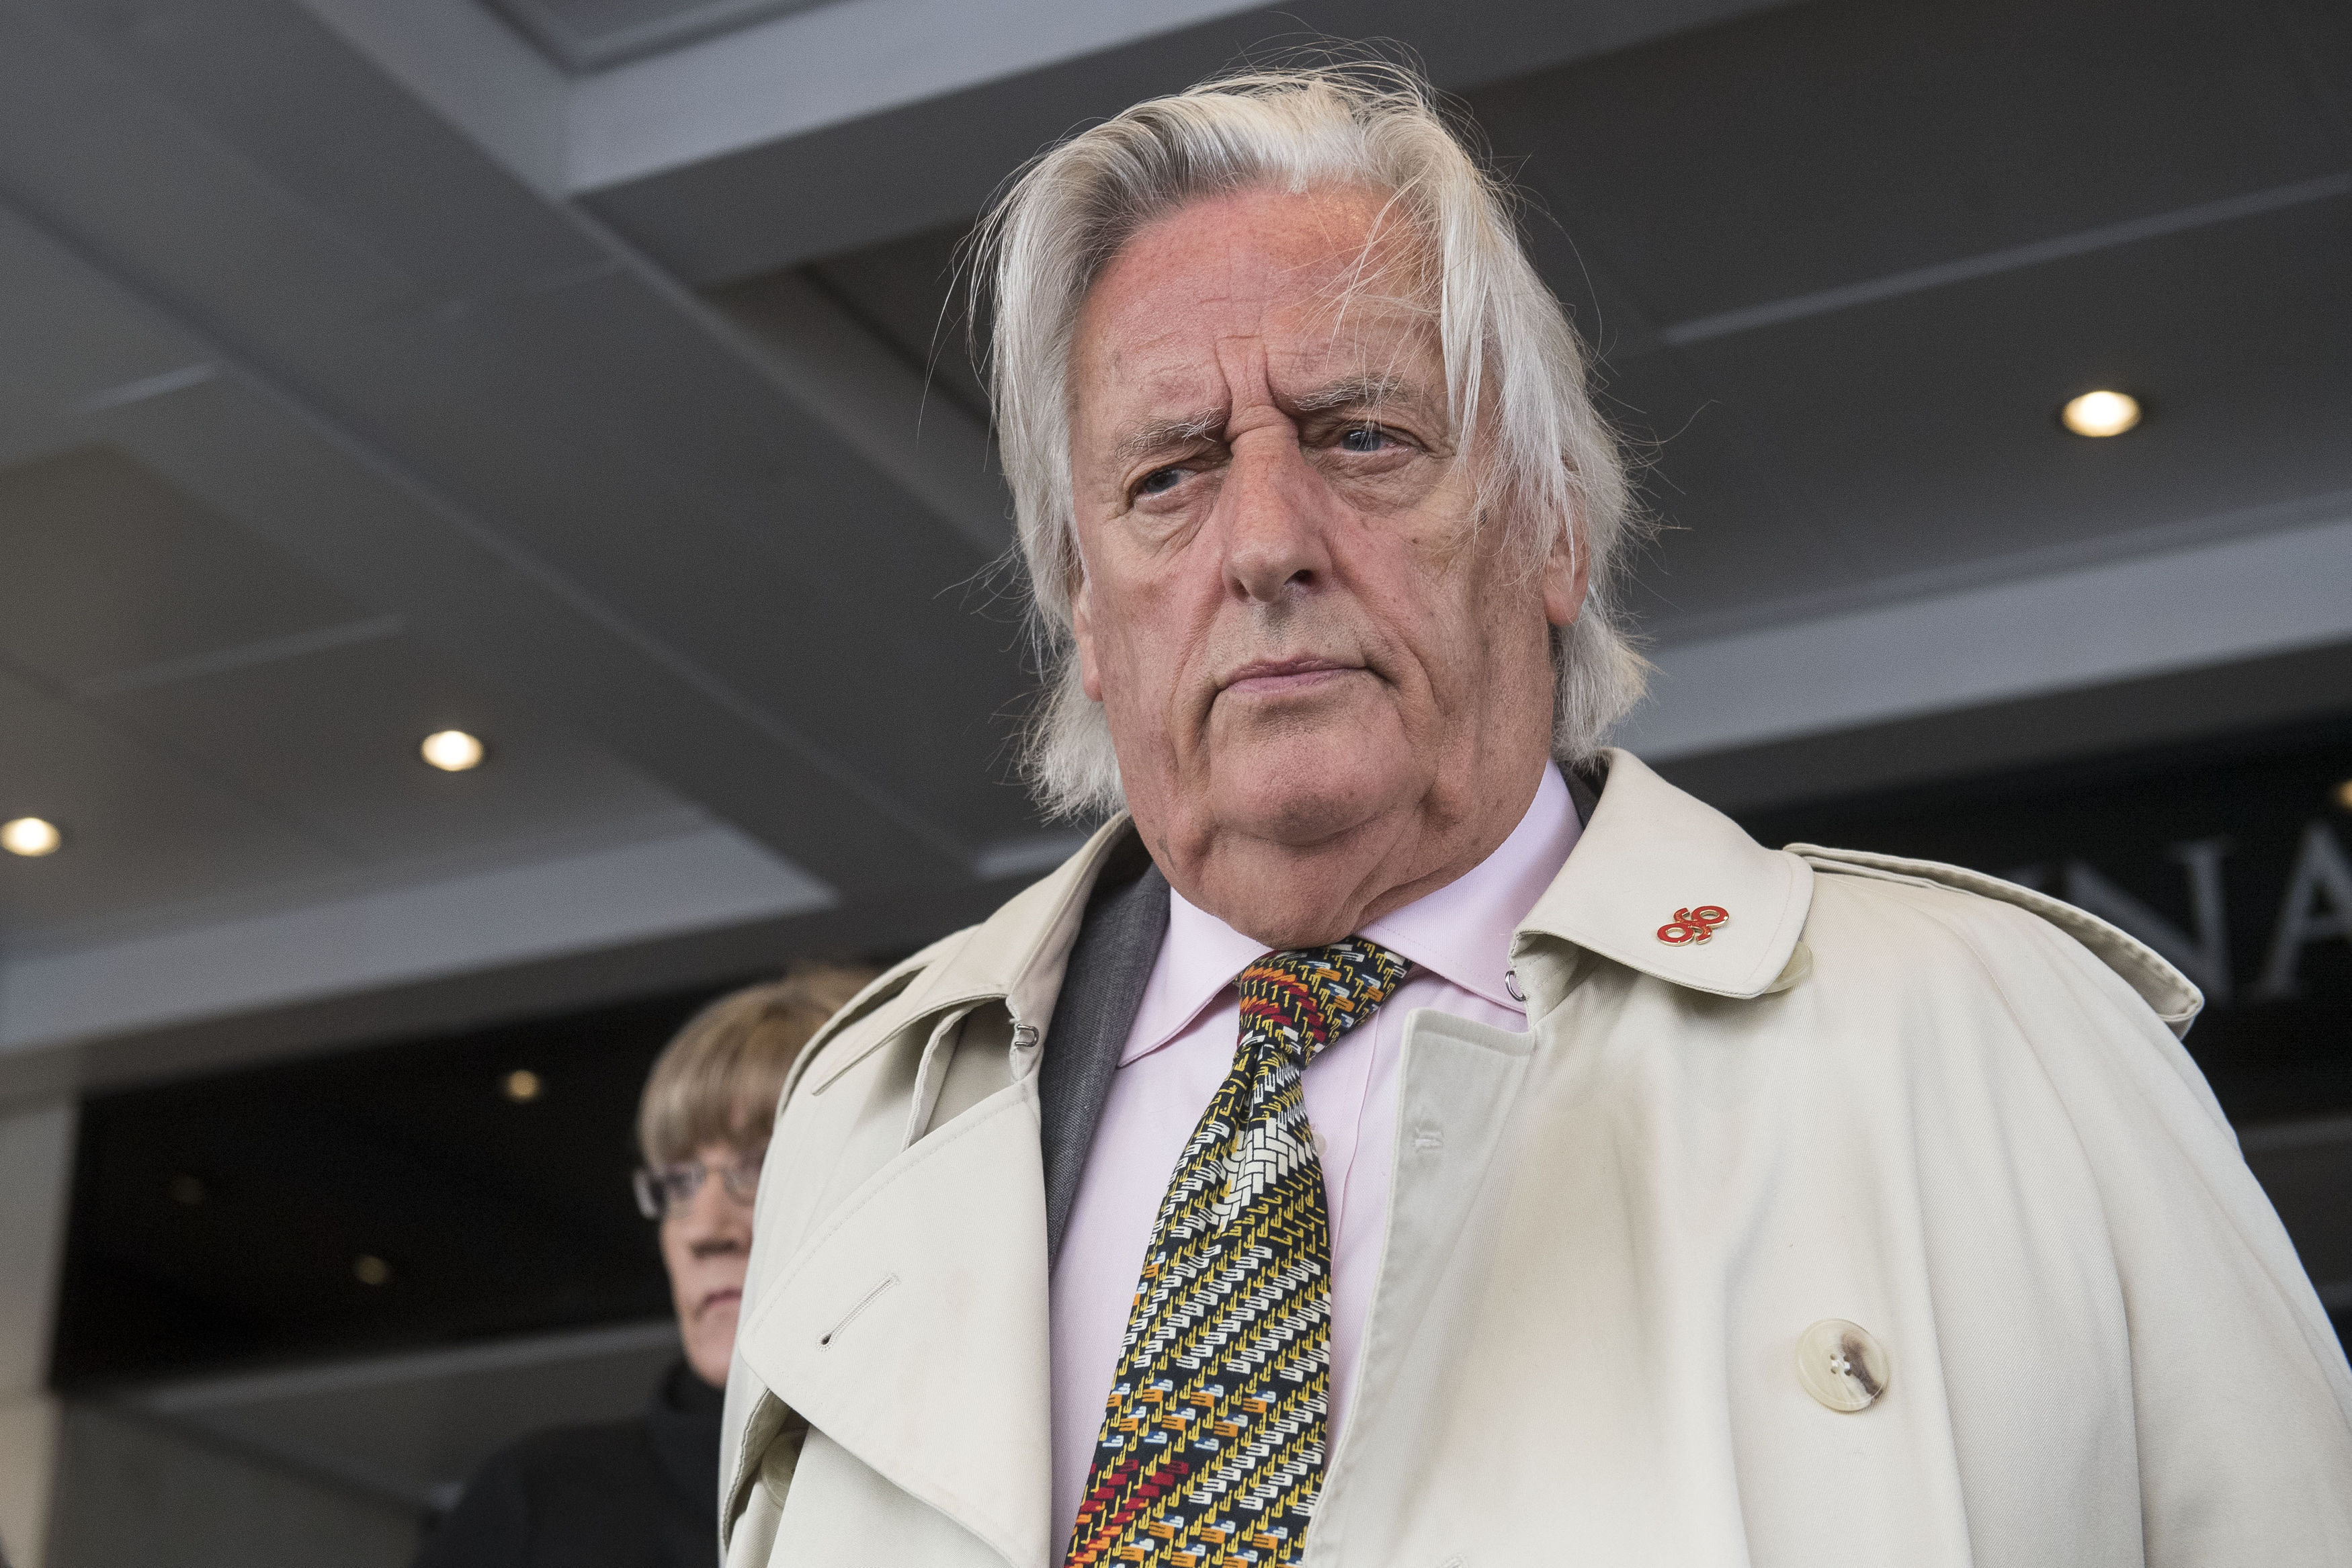 'The restoration of public confidence generally and the restoration of confidence by those most affected, as claimed by the Prime Minister, are yet to be fully engaged,' lawyer Michael Mansfield told the inquiry